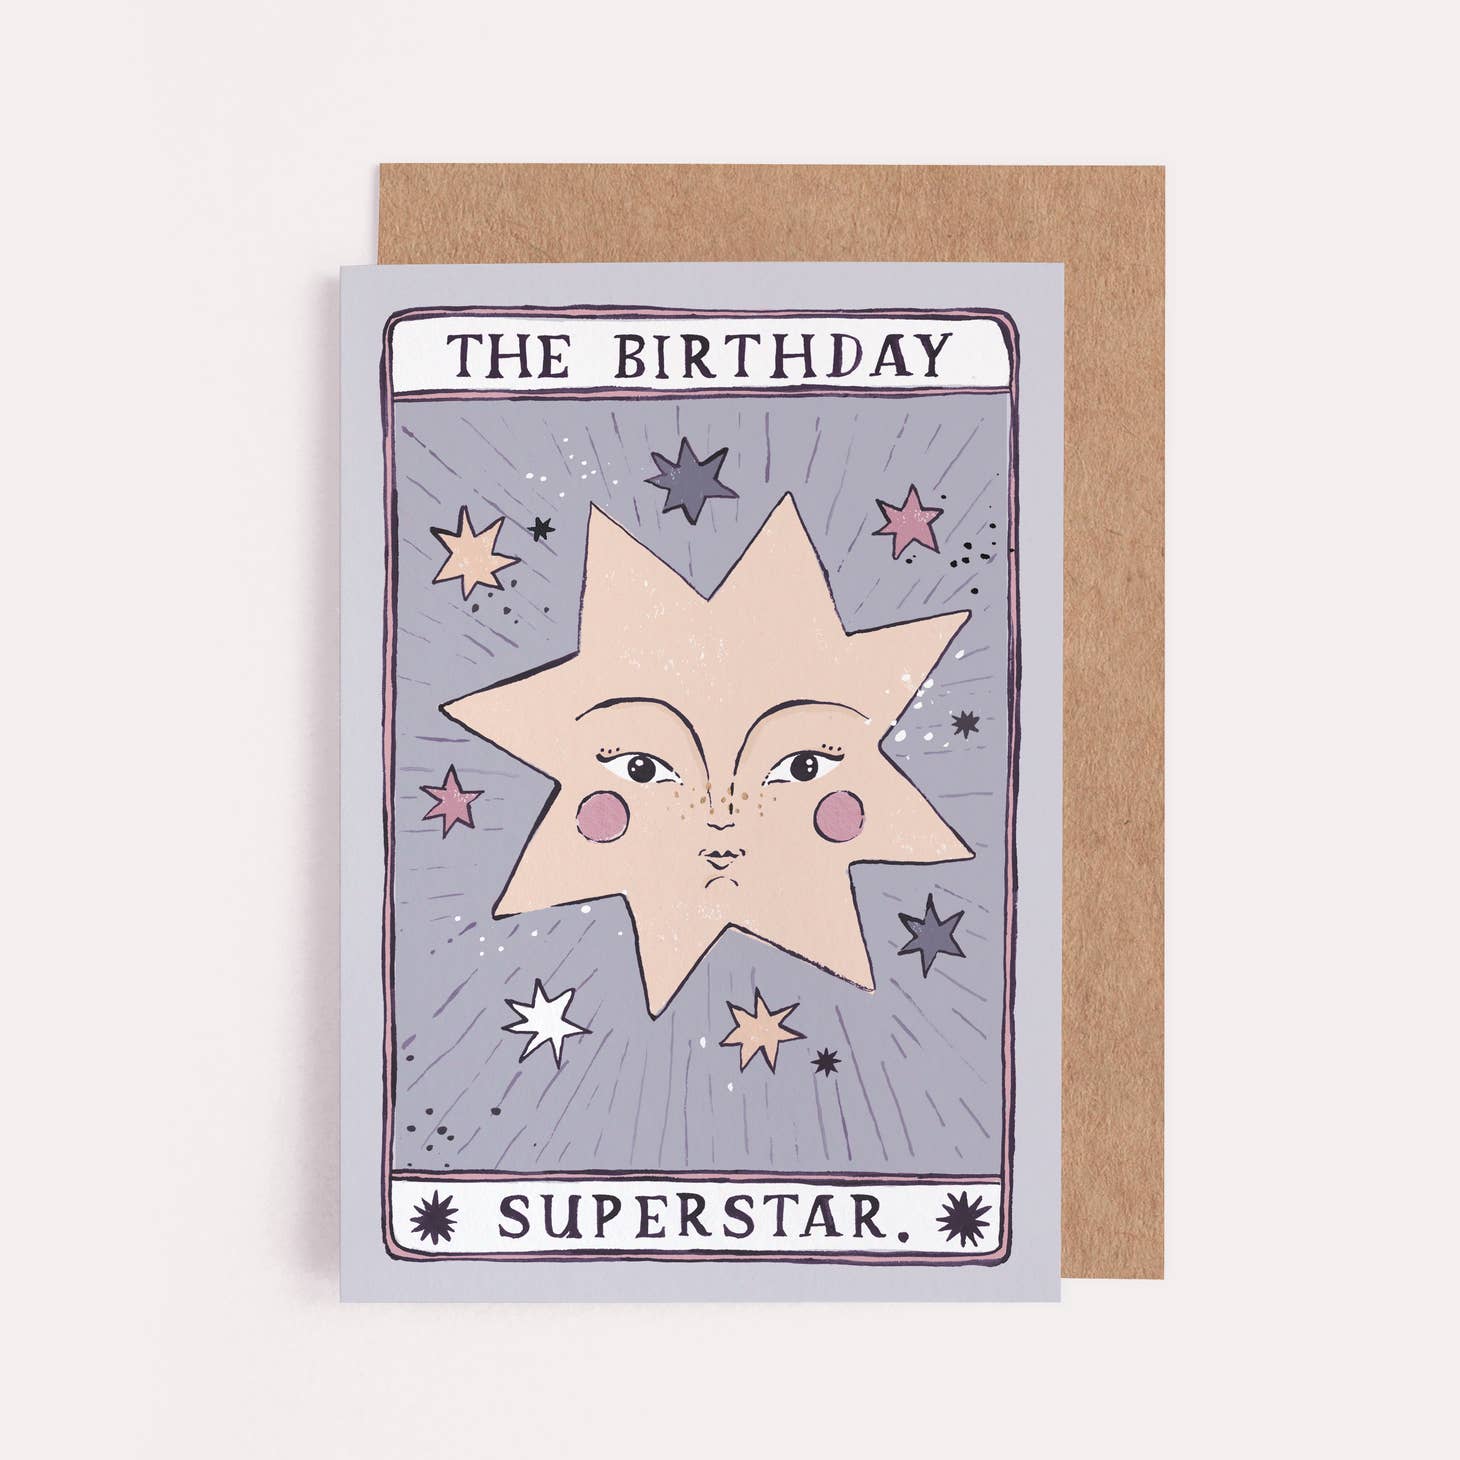 Sister Paper Co. Star The Birthday Superstar Card